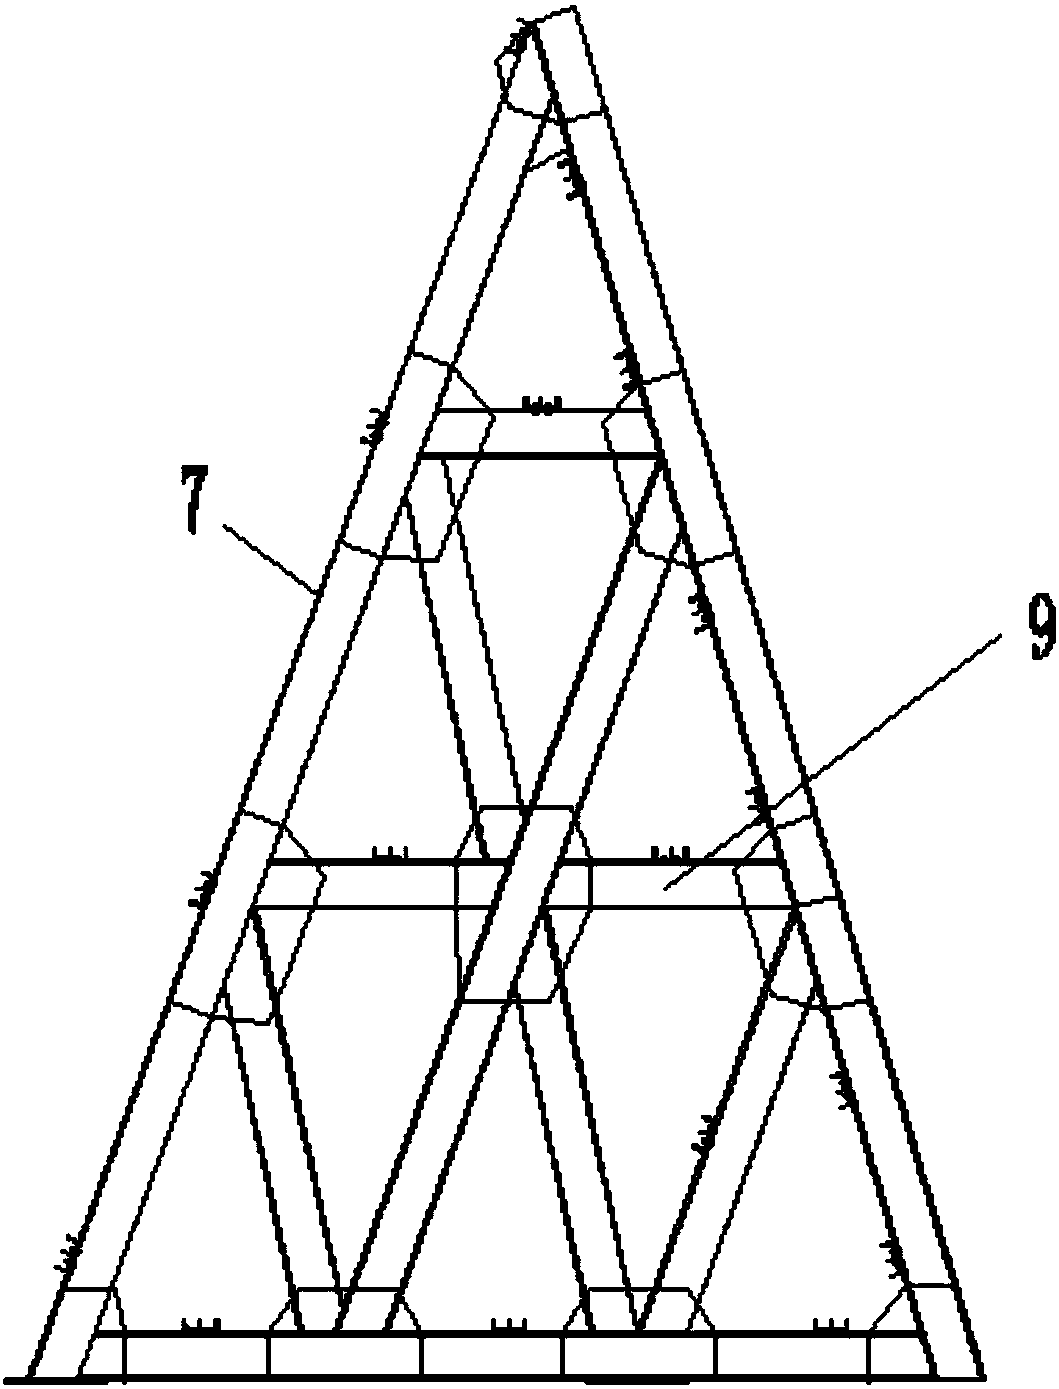 Triangular supporting frame for construction of oblique leg pier